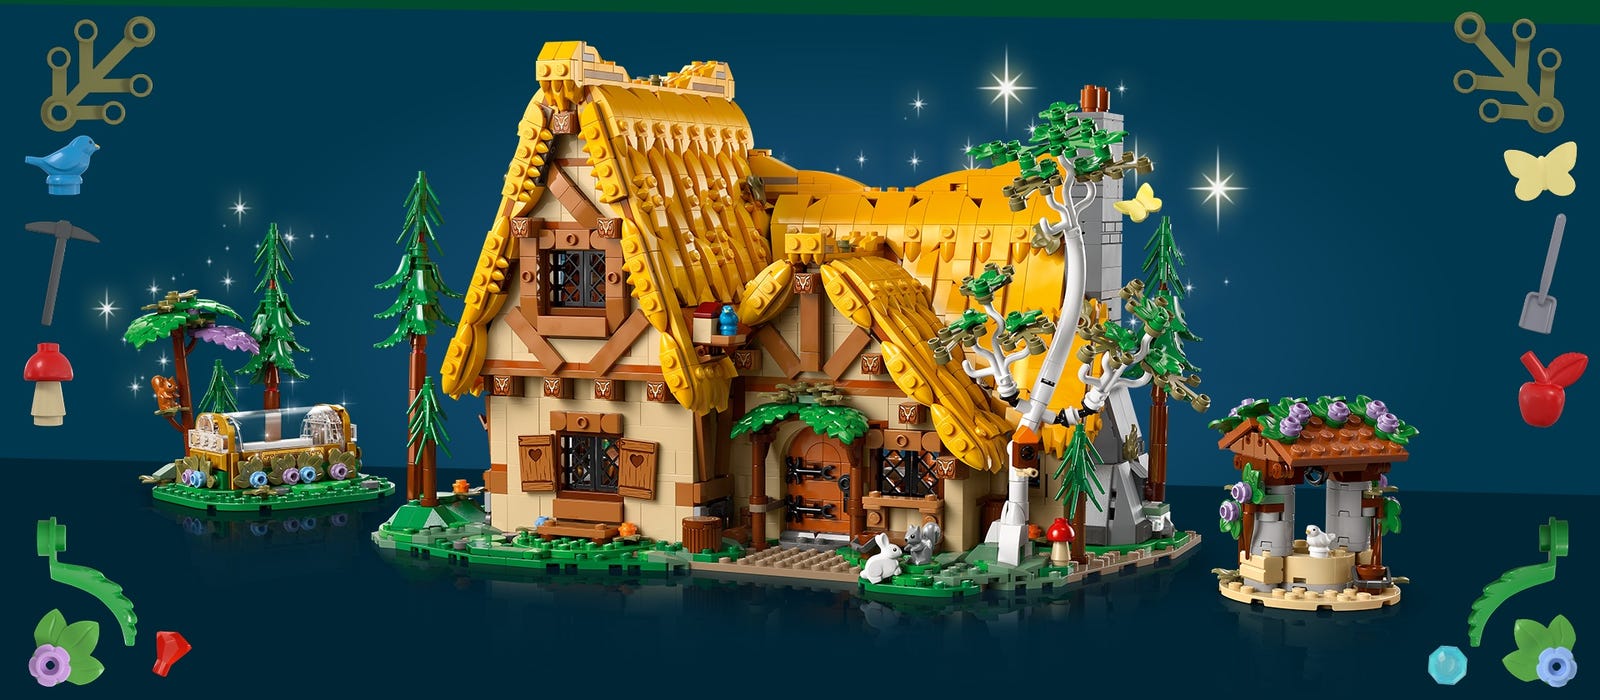 LEGO model of a cottage based on the movie Snow White and the 7 Dwarfs